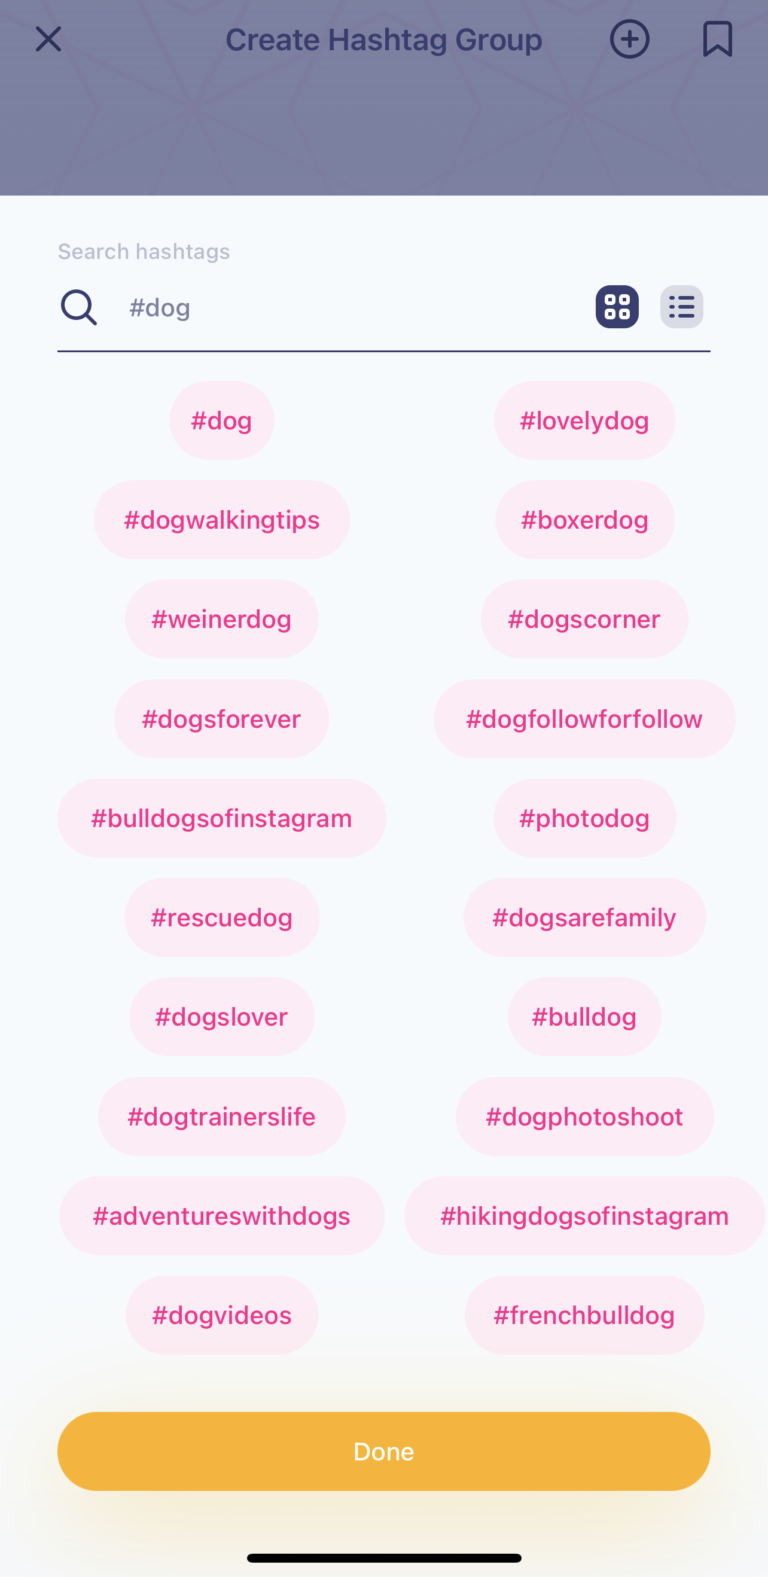 Hashtag Suggestions from Hashtag Expert